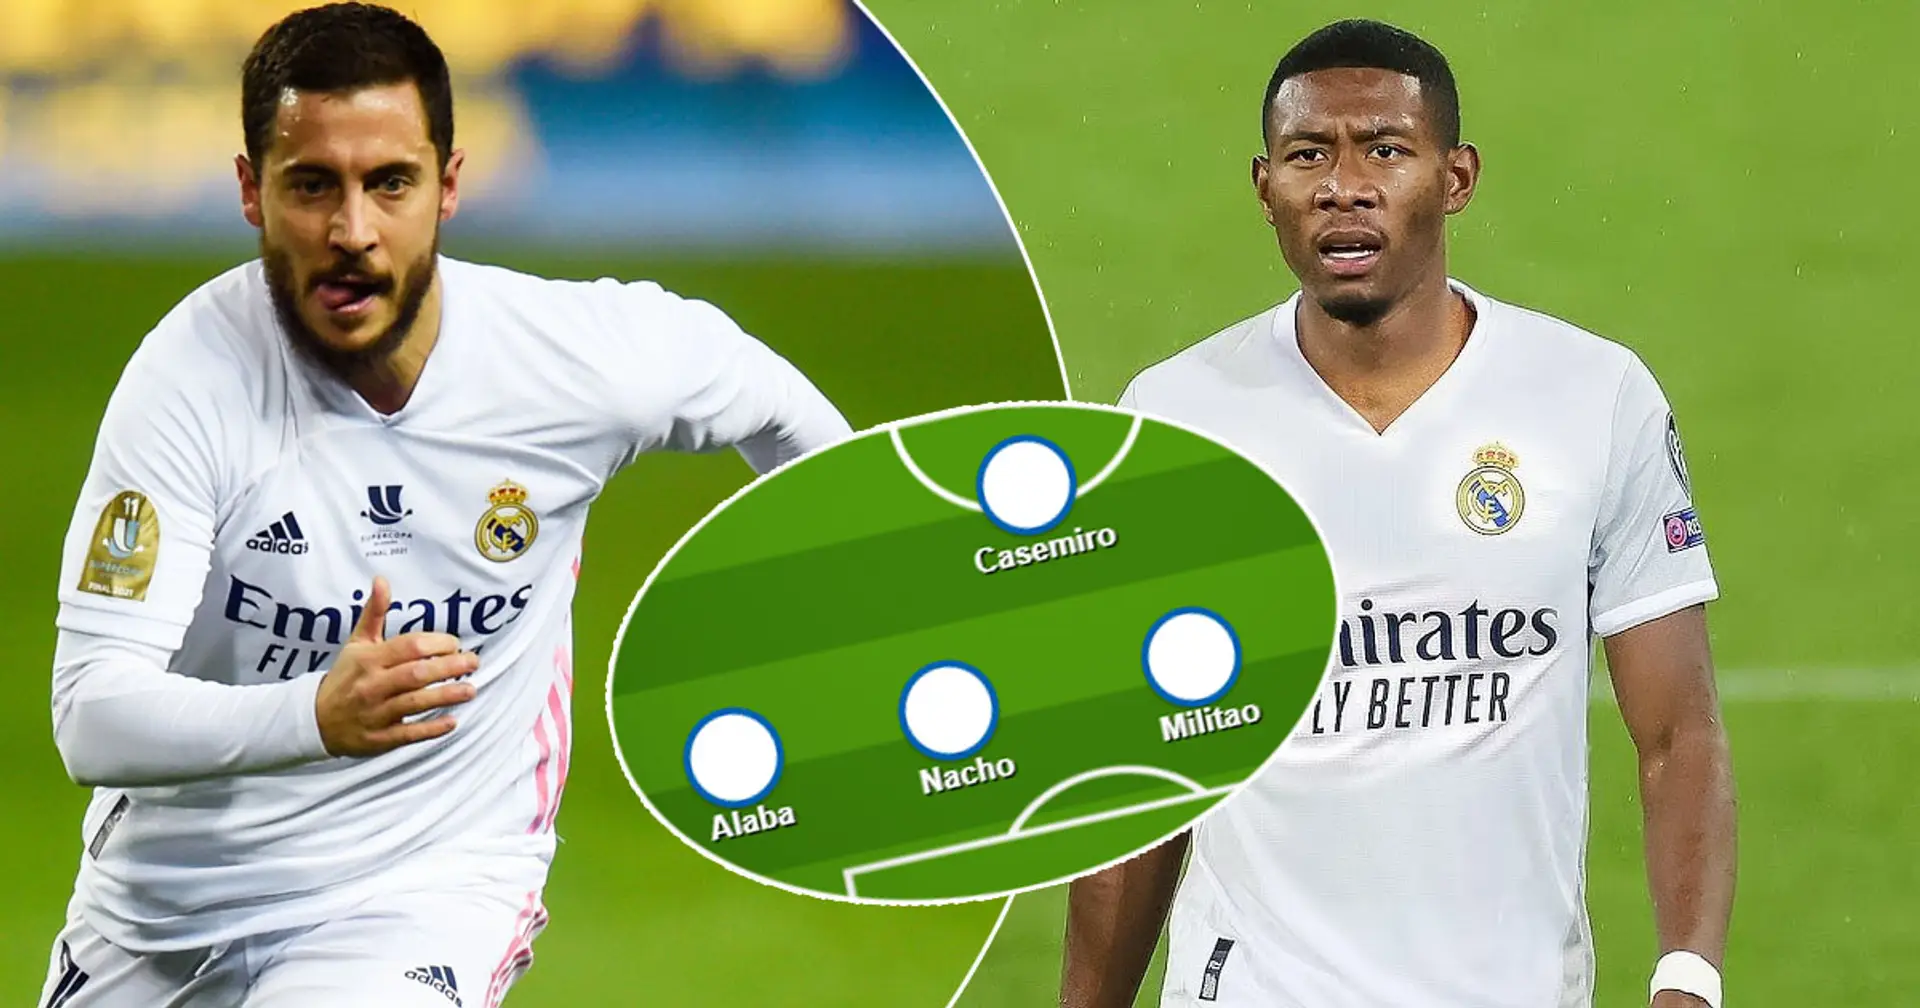 Alaba back in? Select your ultimate XI for Inter clash from 3 options